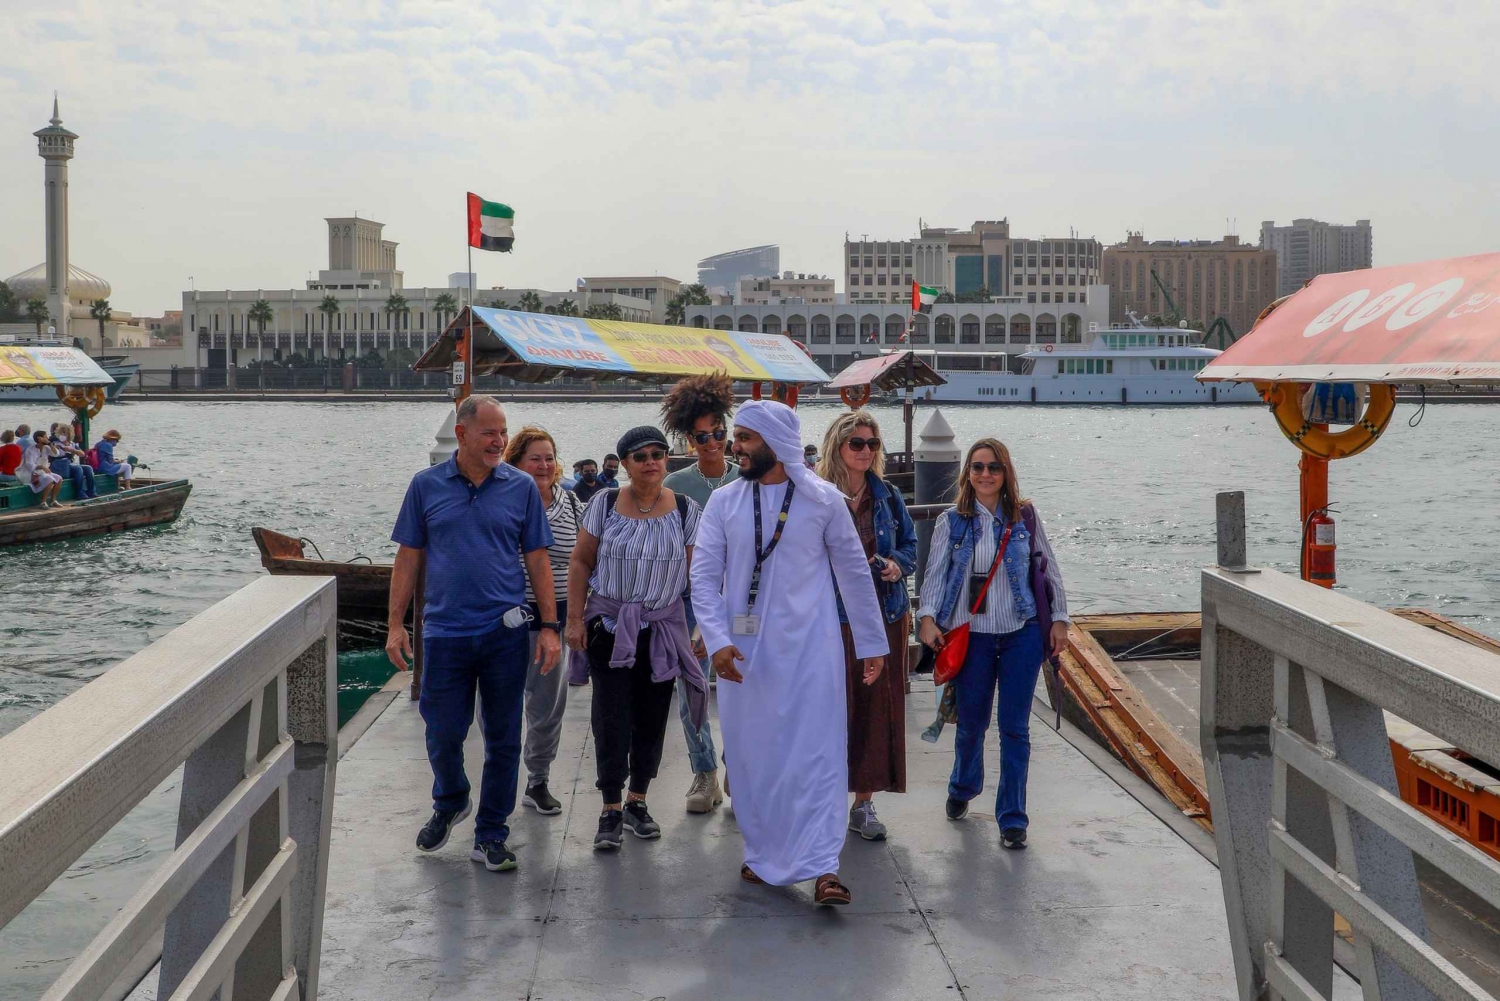 Dubai: Old Town Walking Tour with Lunch & Vintage Car Ride